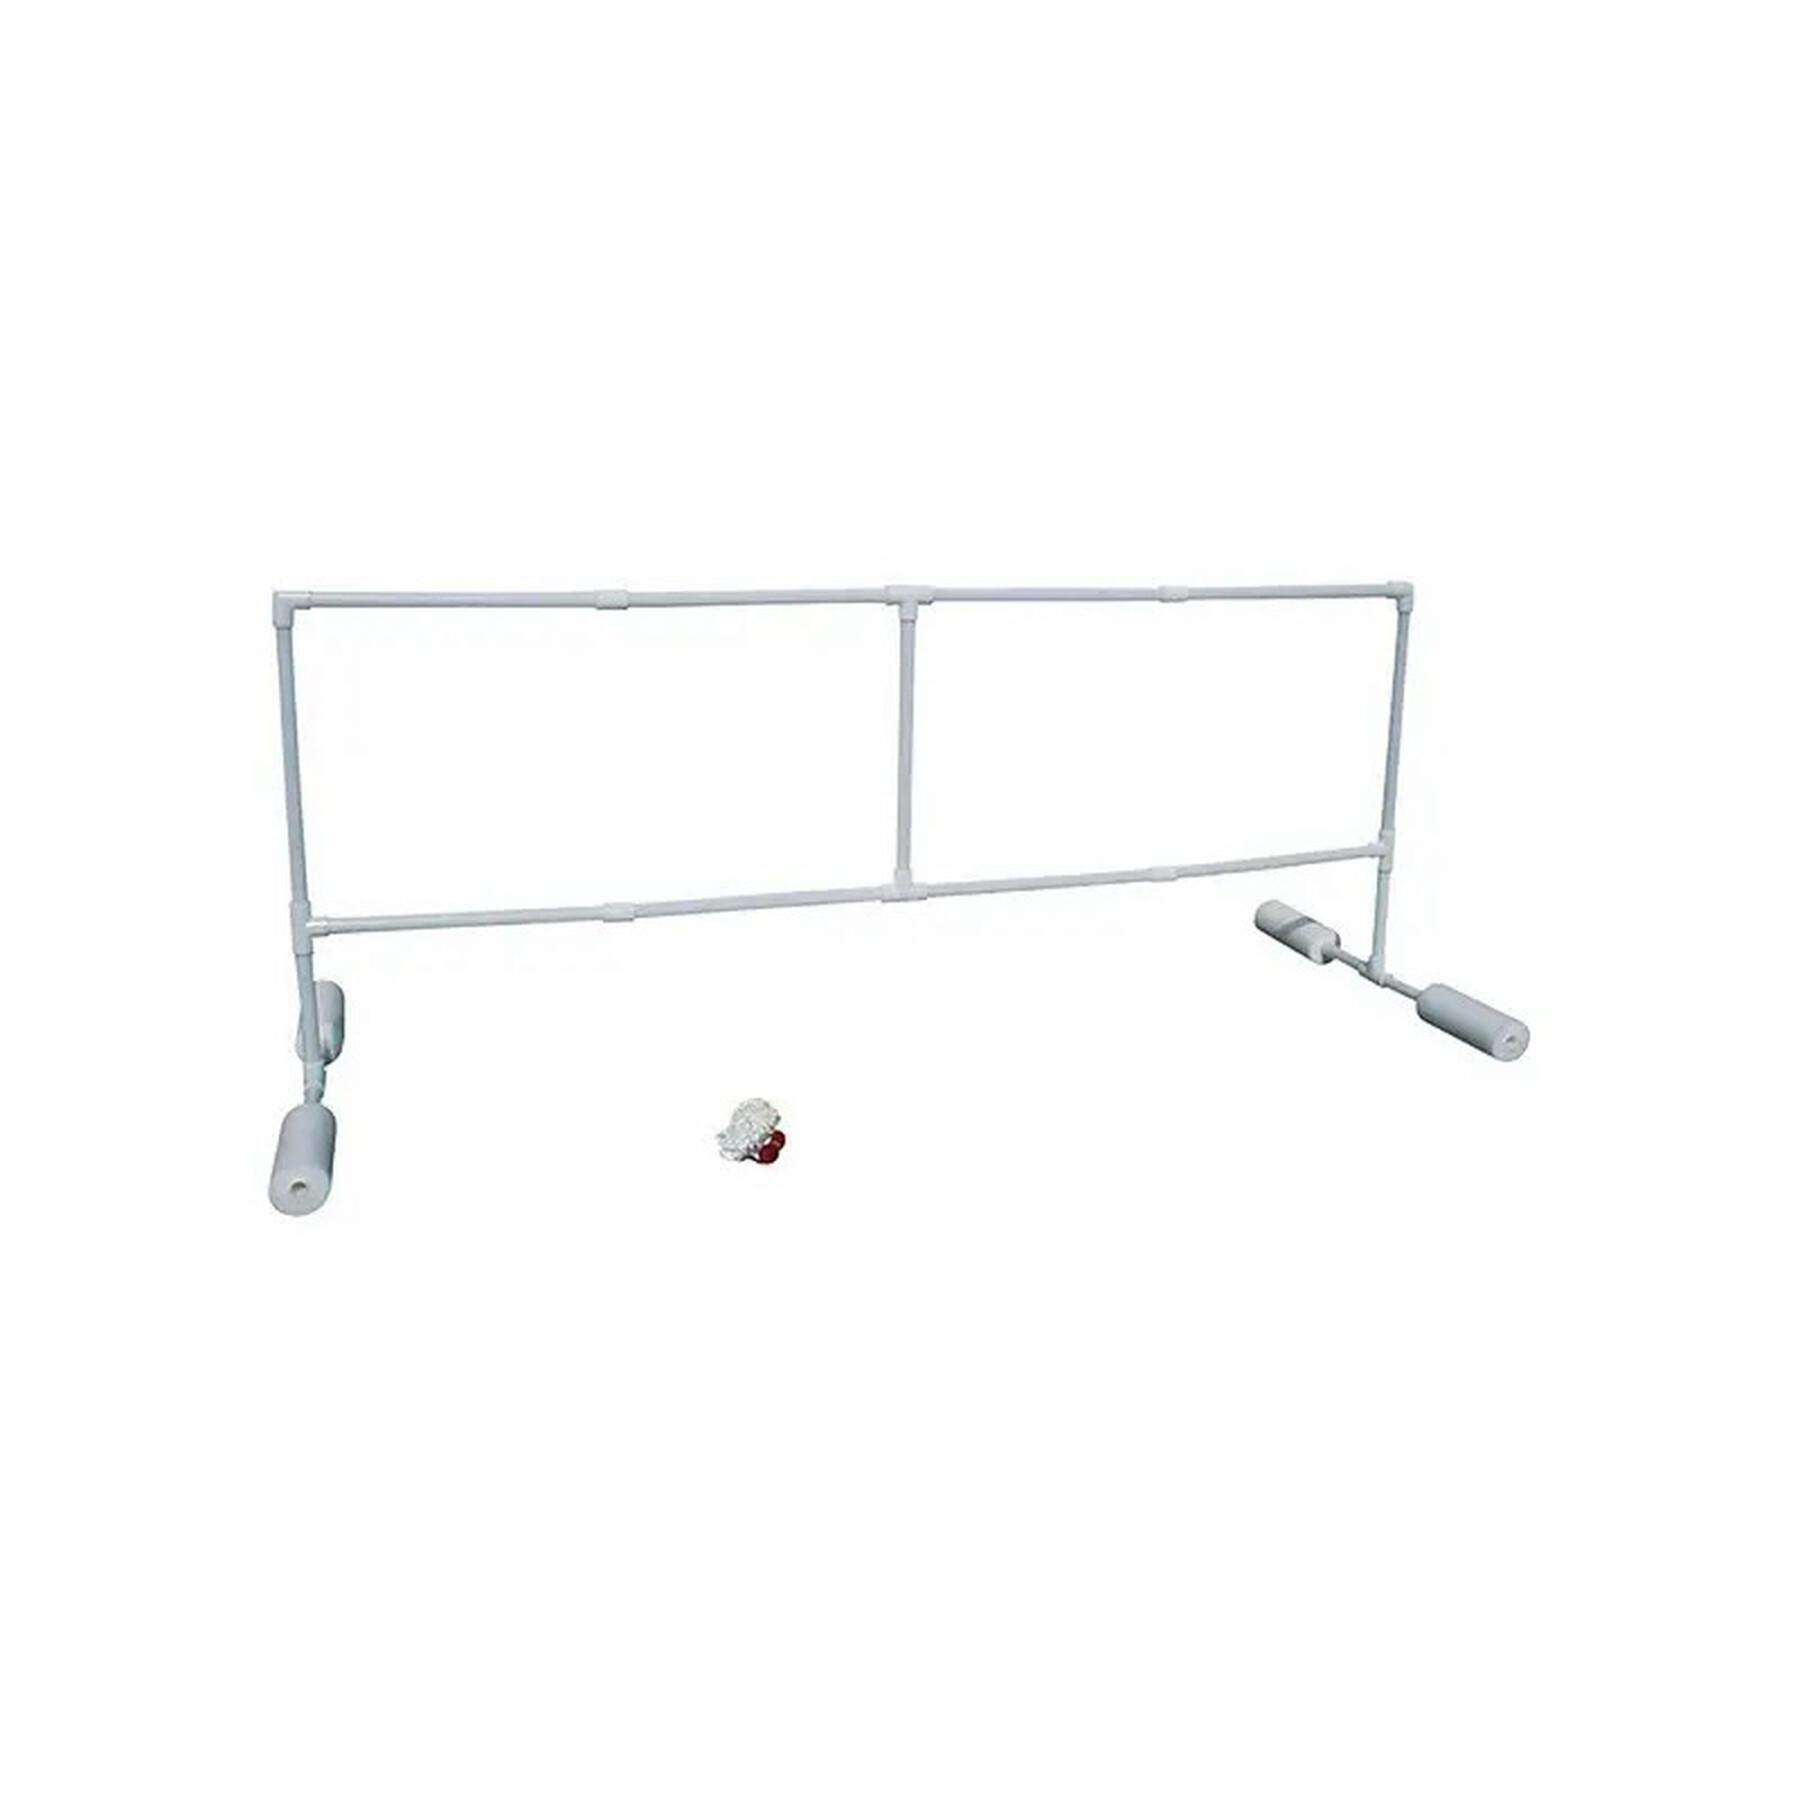 Red Softee volley-ball flottant pvc